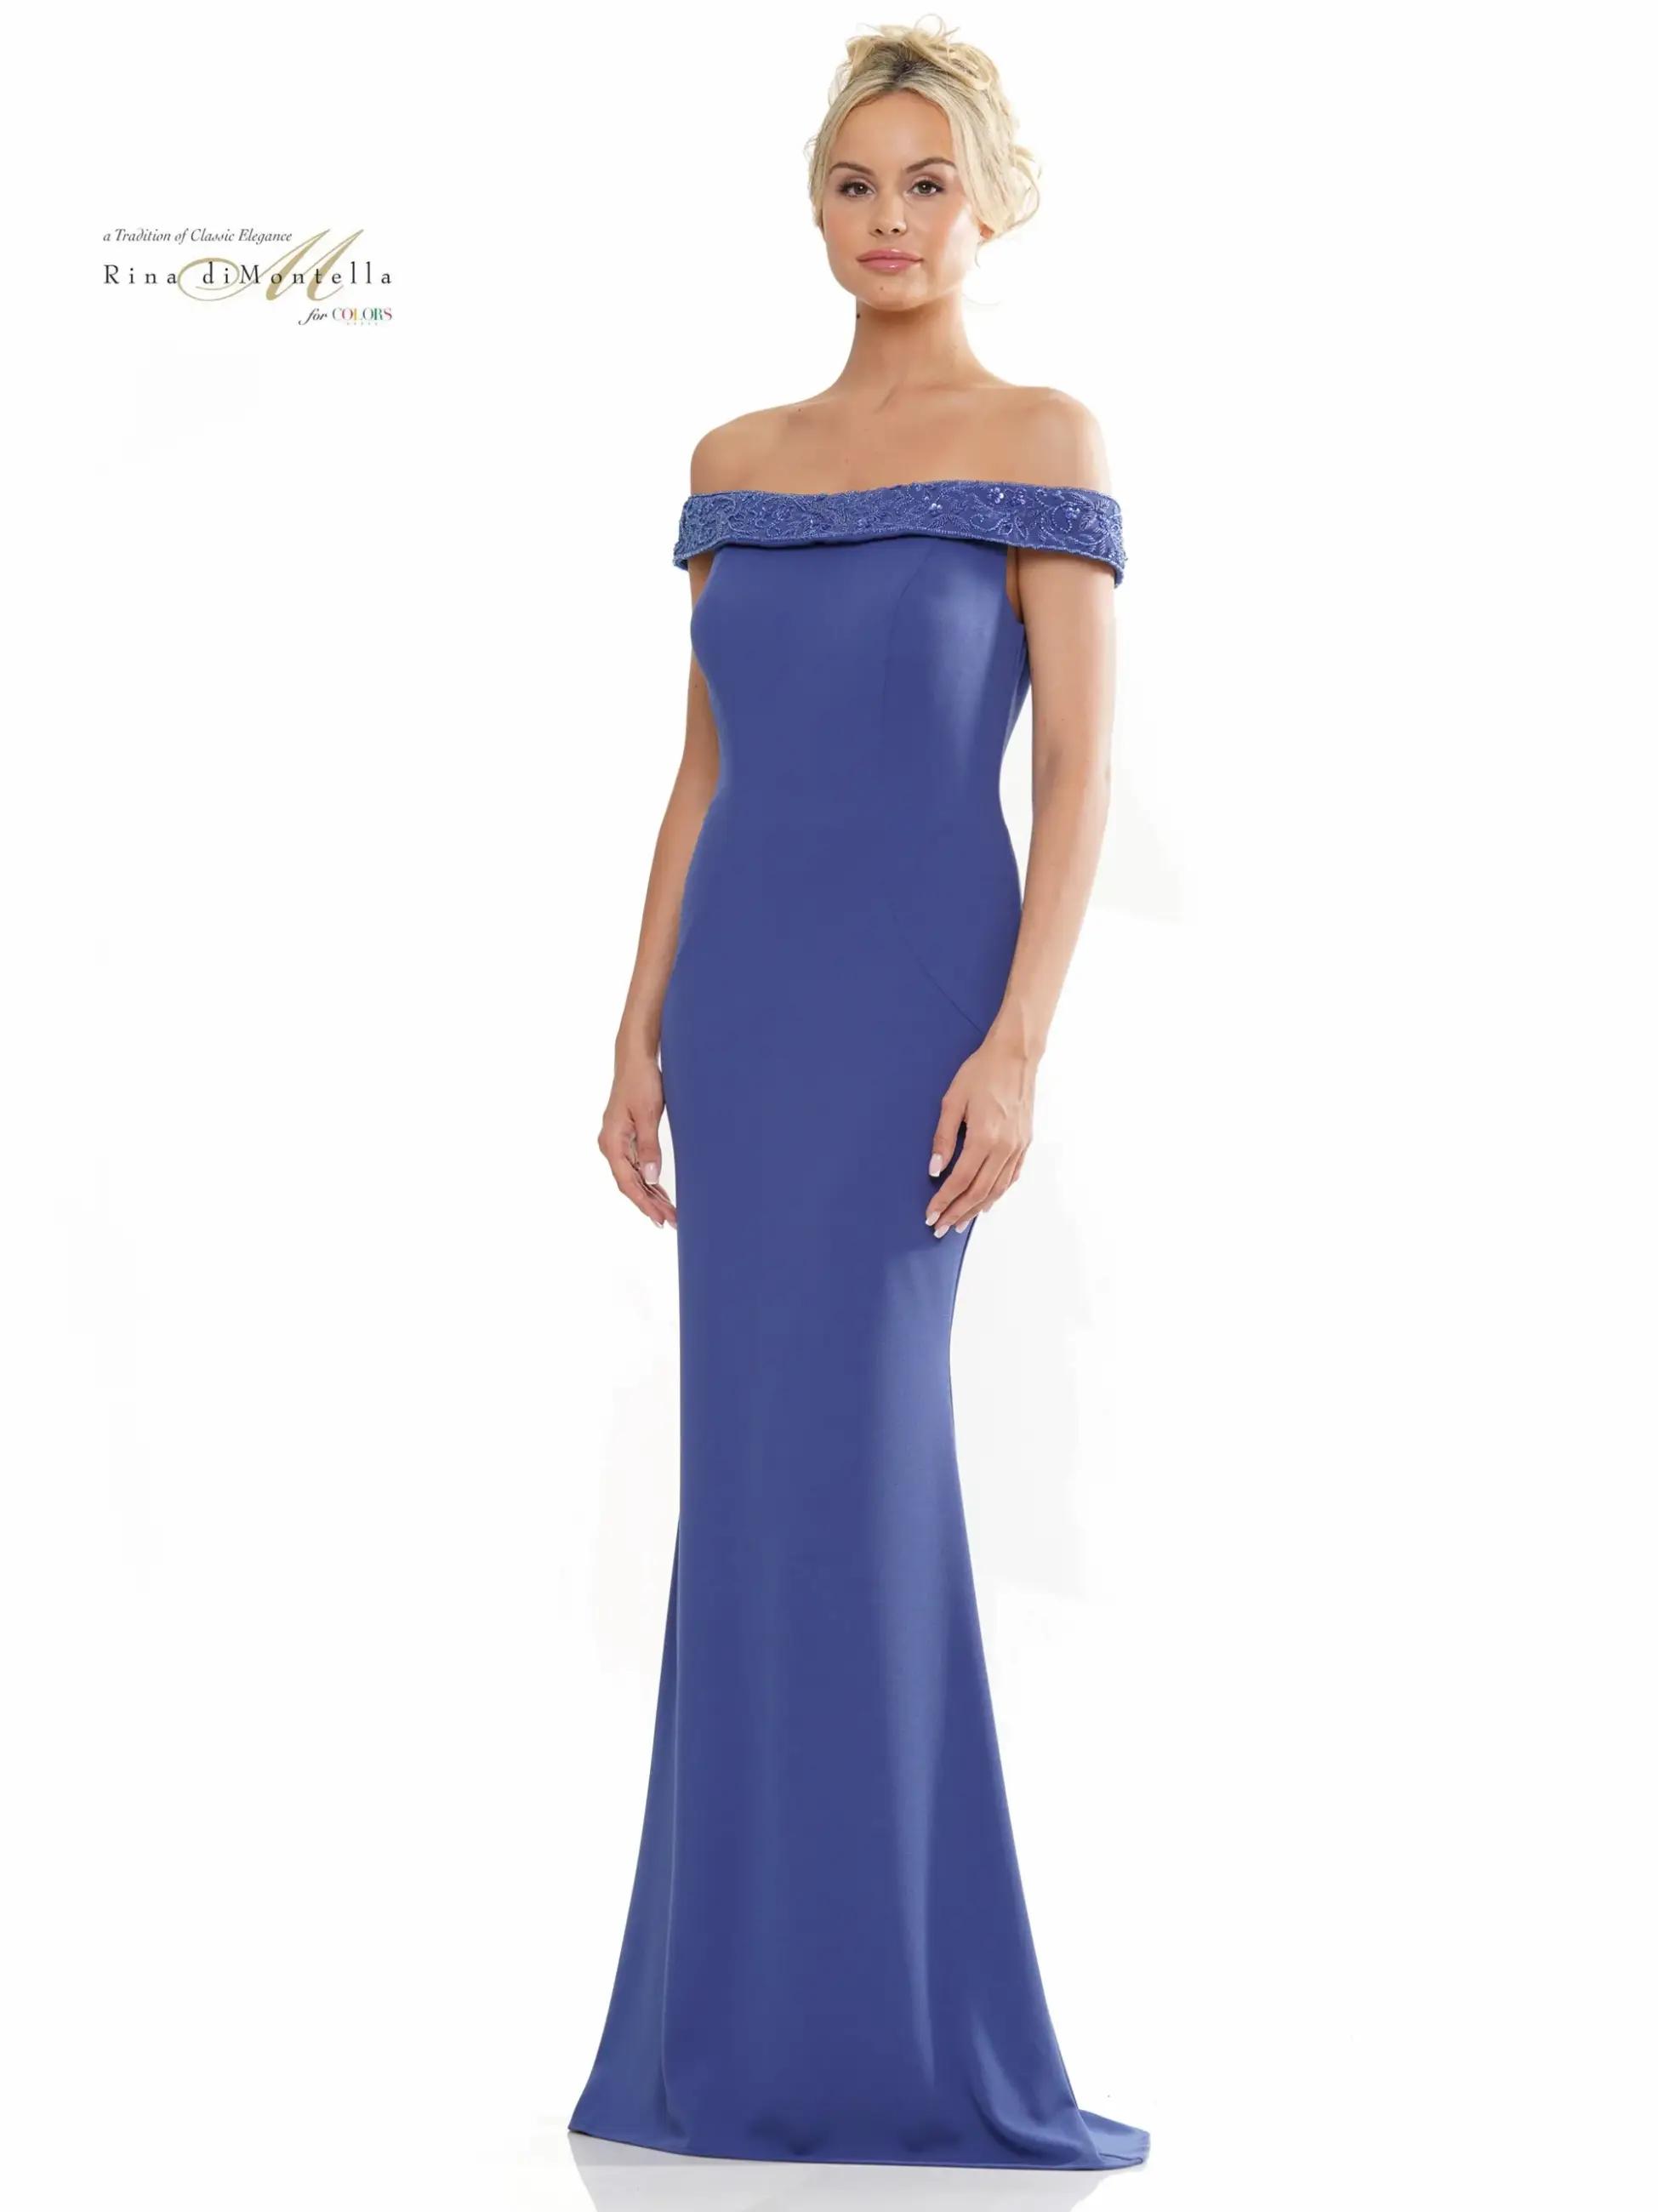 Top Picks for Mother of the Bride Dresses Image